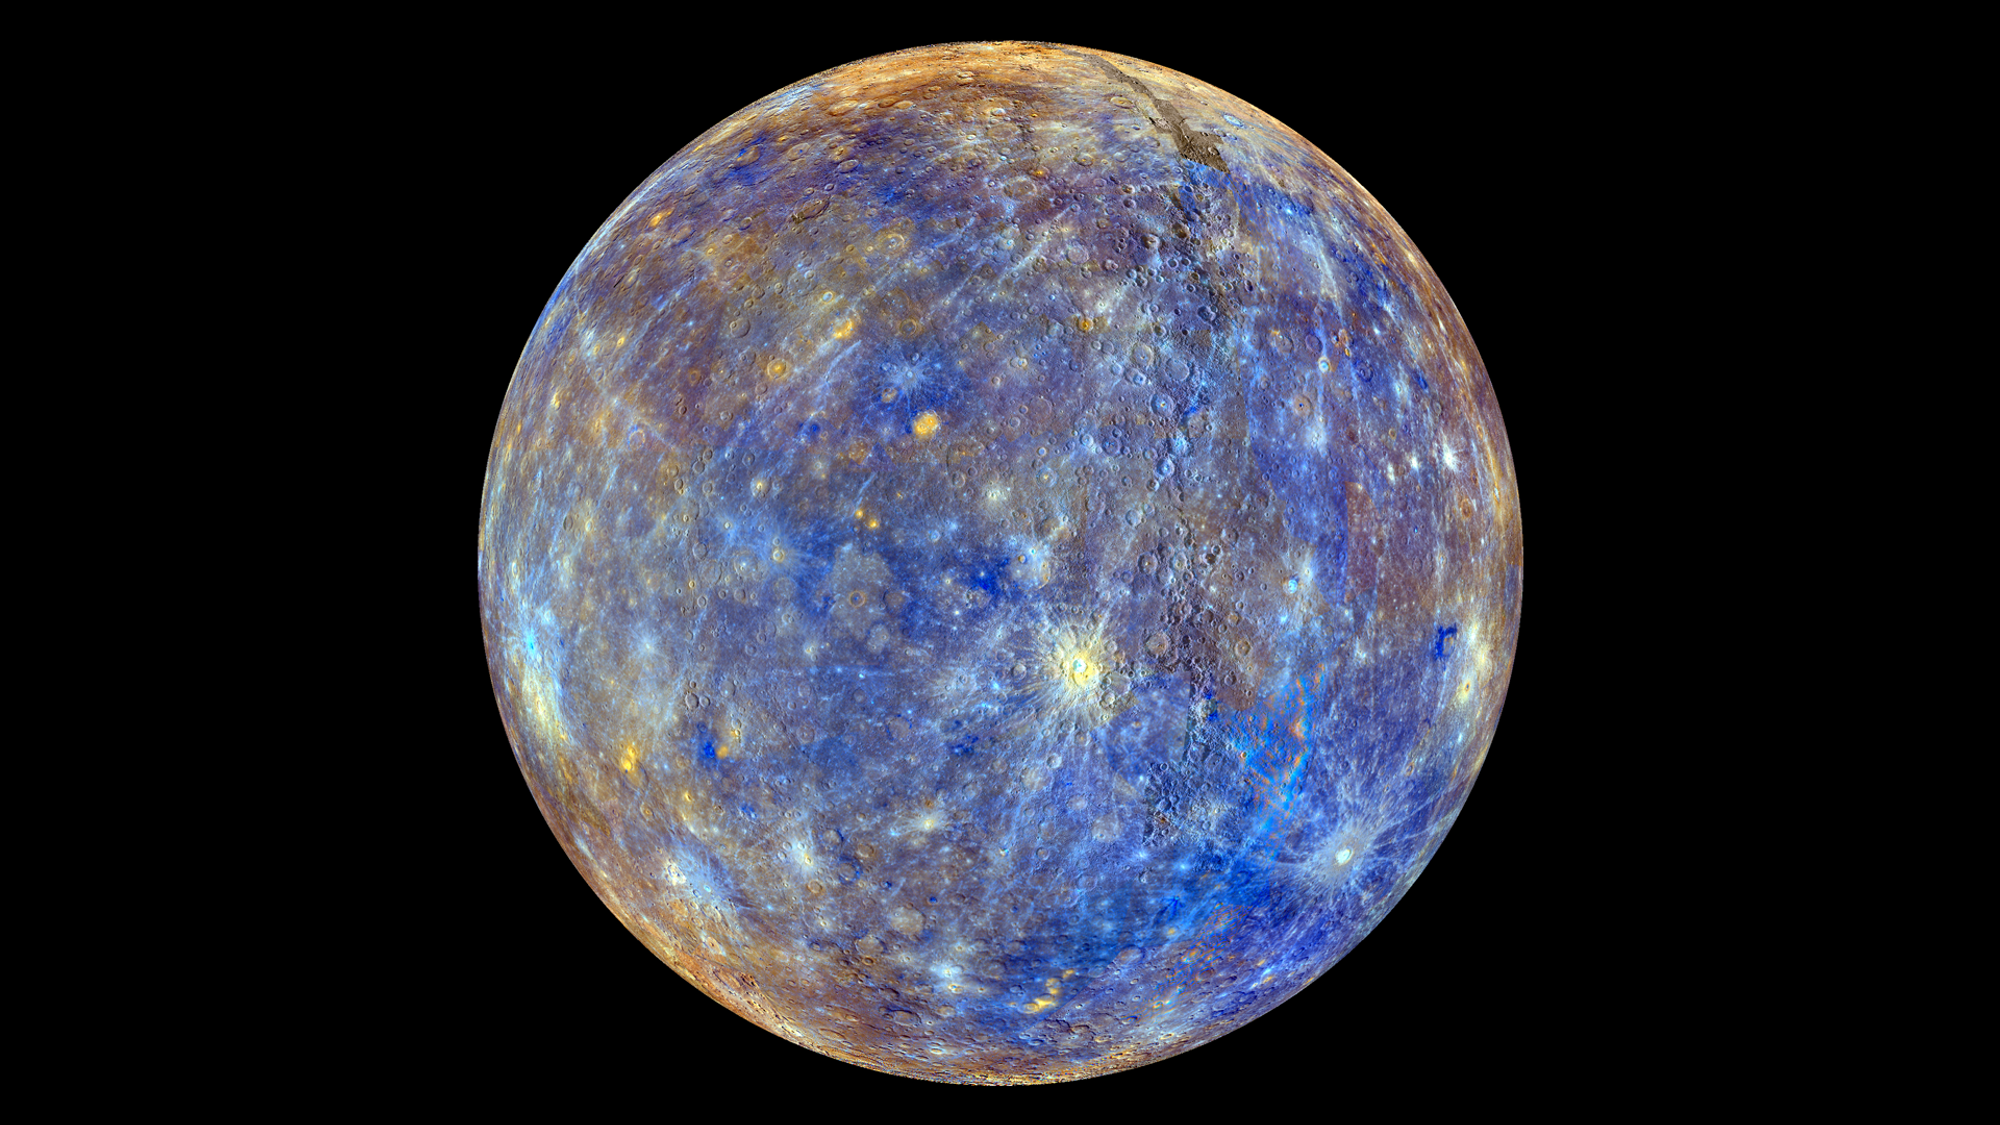 This colorful view of Mercury was produced by using images from the color base map imaging campaign during MESSENGER's primary mission. These colors are not what Mercury would look like to the human eye, but rather the colors enhance the chemical, mineralogical, and physical differences between the rocks that make up Mercury's surface.     Young crater rays, extending radially from fresh impact craters, appear light blue or white. Medium- and dark-blue areas are a geologic unit of Mercury's crust known as the "low-reflectance material", thought to be rich in a dark, opaque mineral. Tan areas are plains formed by eruption of highly fluid lavas. The crater in the upper right whose rays stretch across the planet is Hokusai.